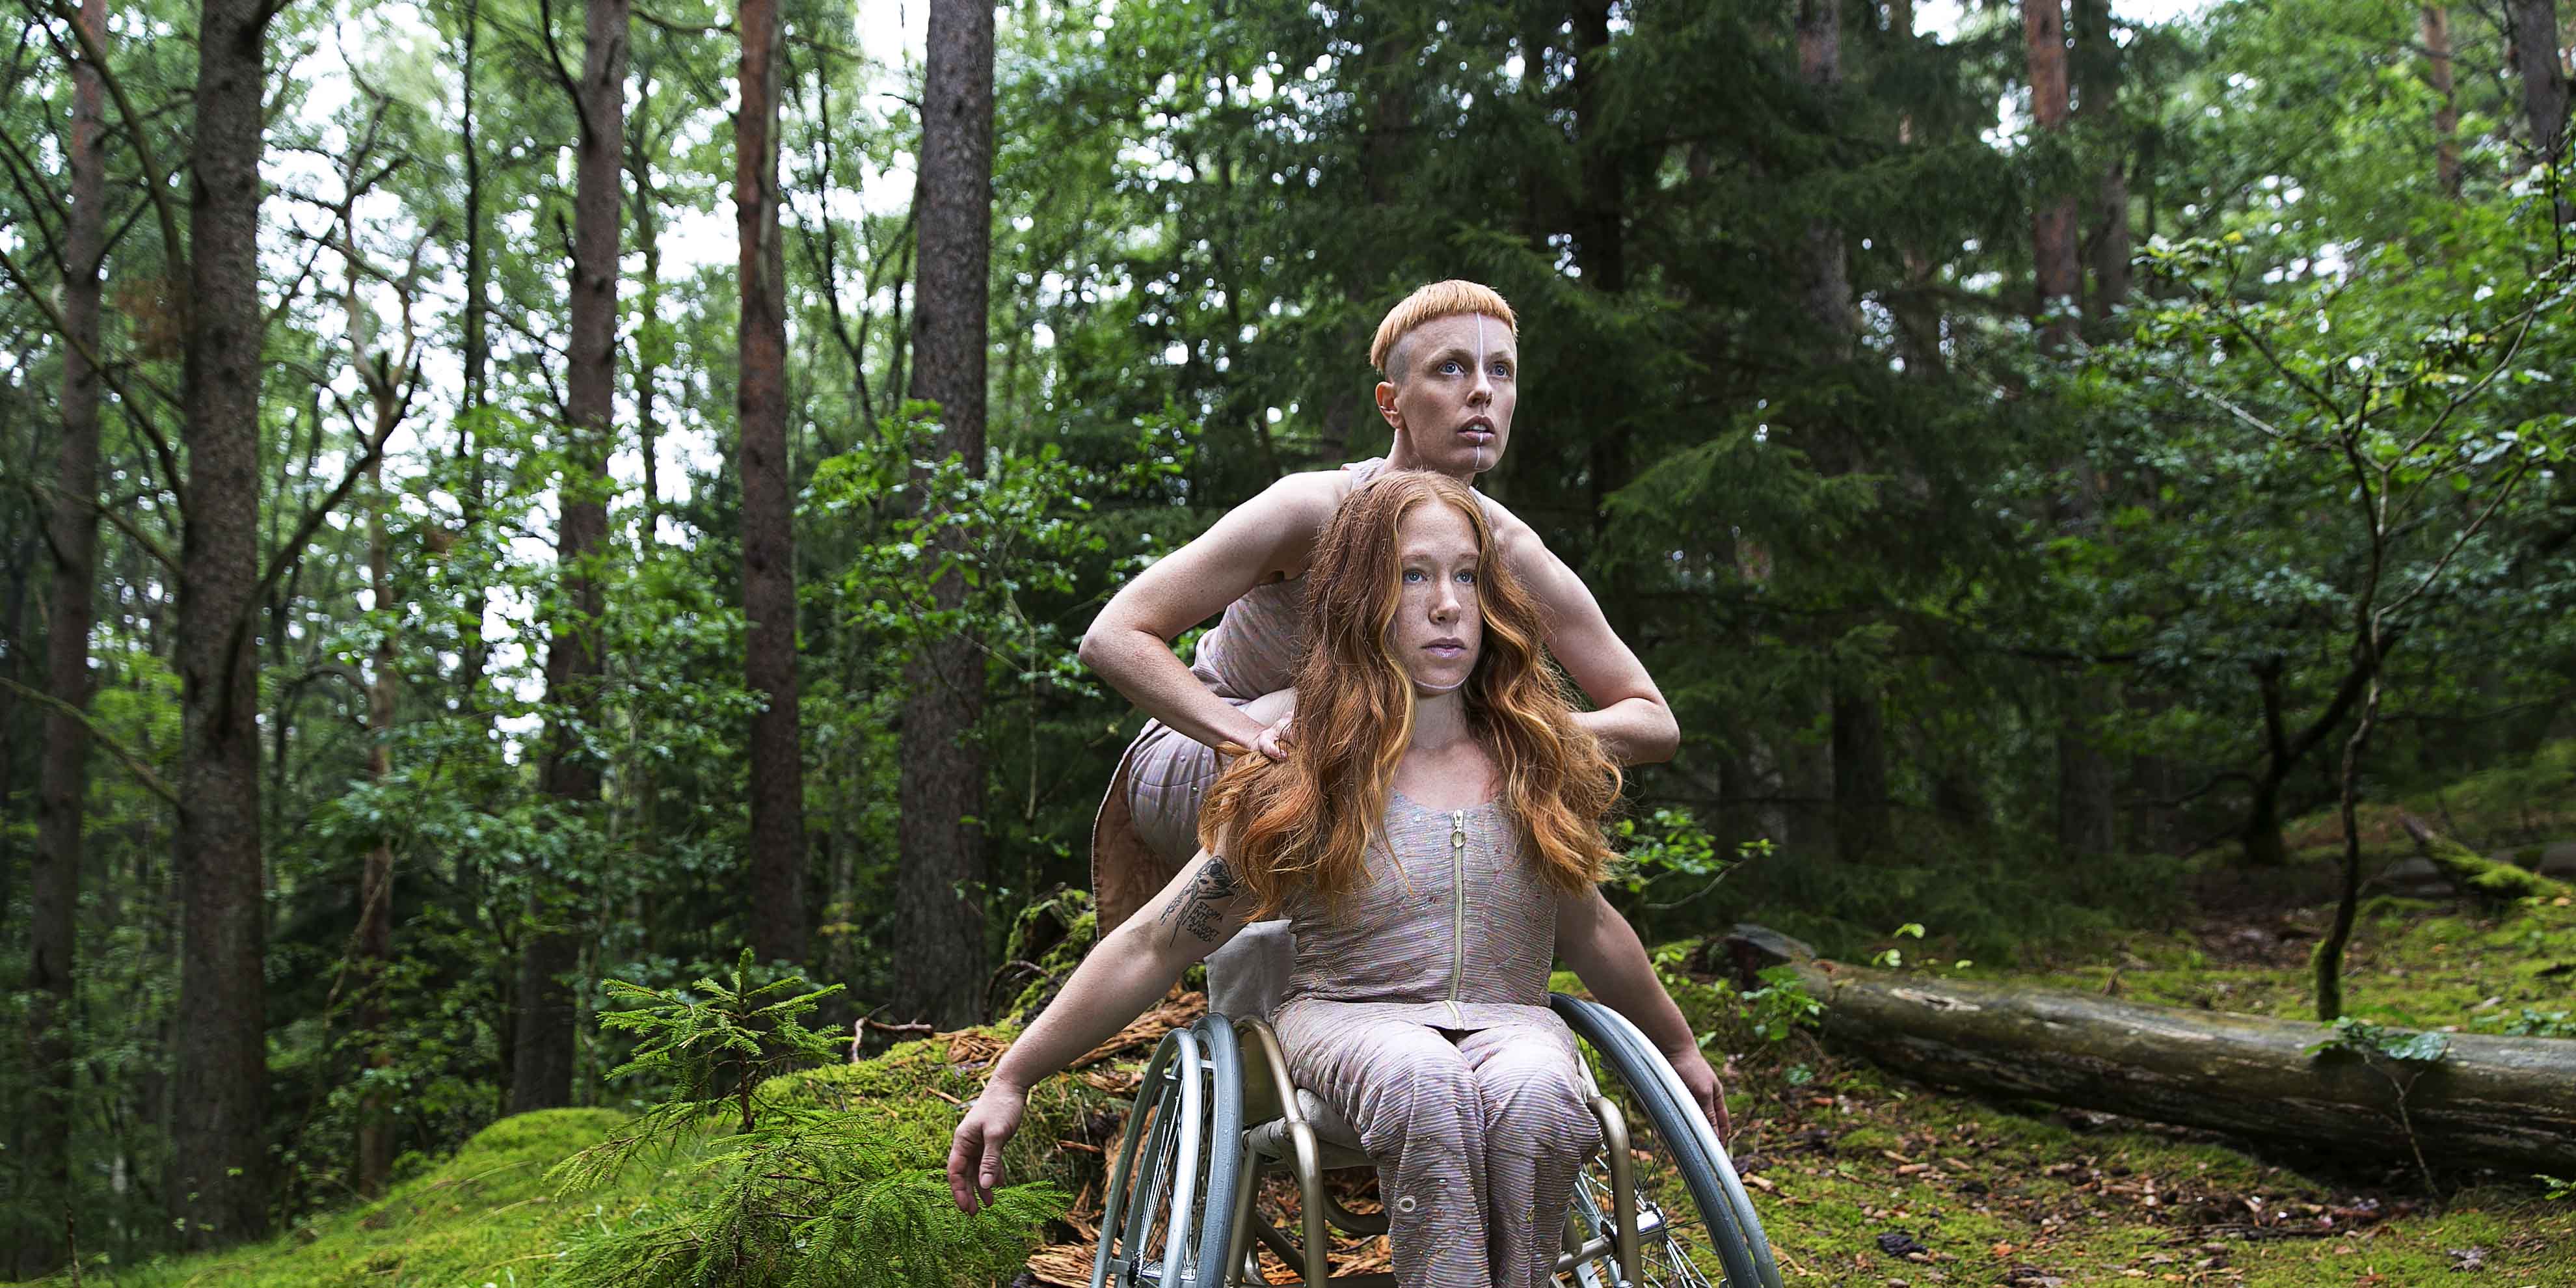 Image for the performance Hannah Felicia. The image depicts the dancers in a forest, wearing costumes shimmering in pink. Felicia is sitting in a wheelchair with her arms pointing backwards, flowing red hair, looking upwards right. Behind her, up on the wheelchair, Hannah crouches, also looking upwards right. Photo: Anna Ósk Erlingsdóttir